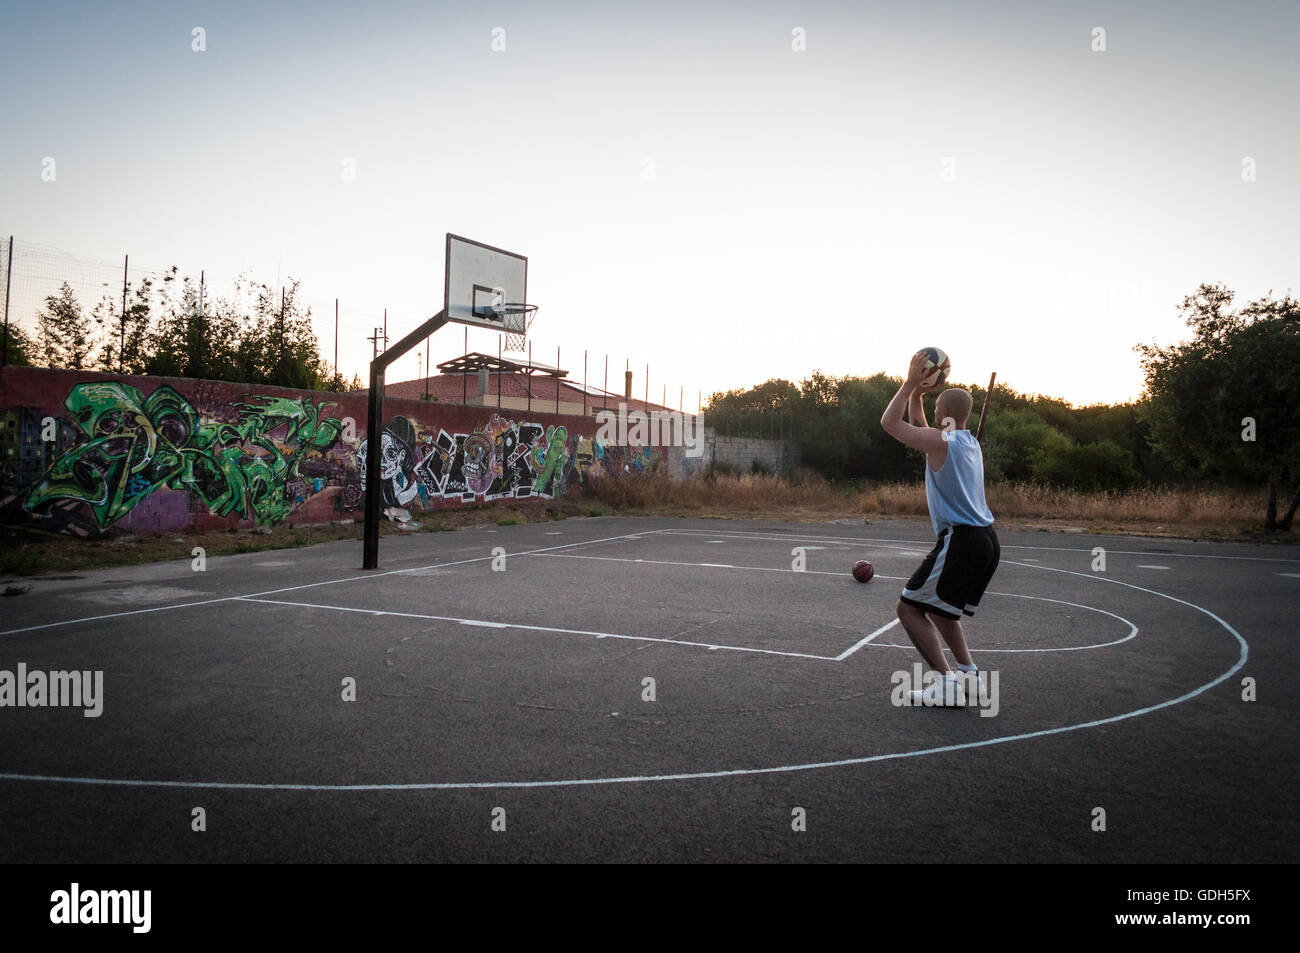 Basketball player in city playground at sunset Stock Photo